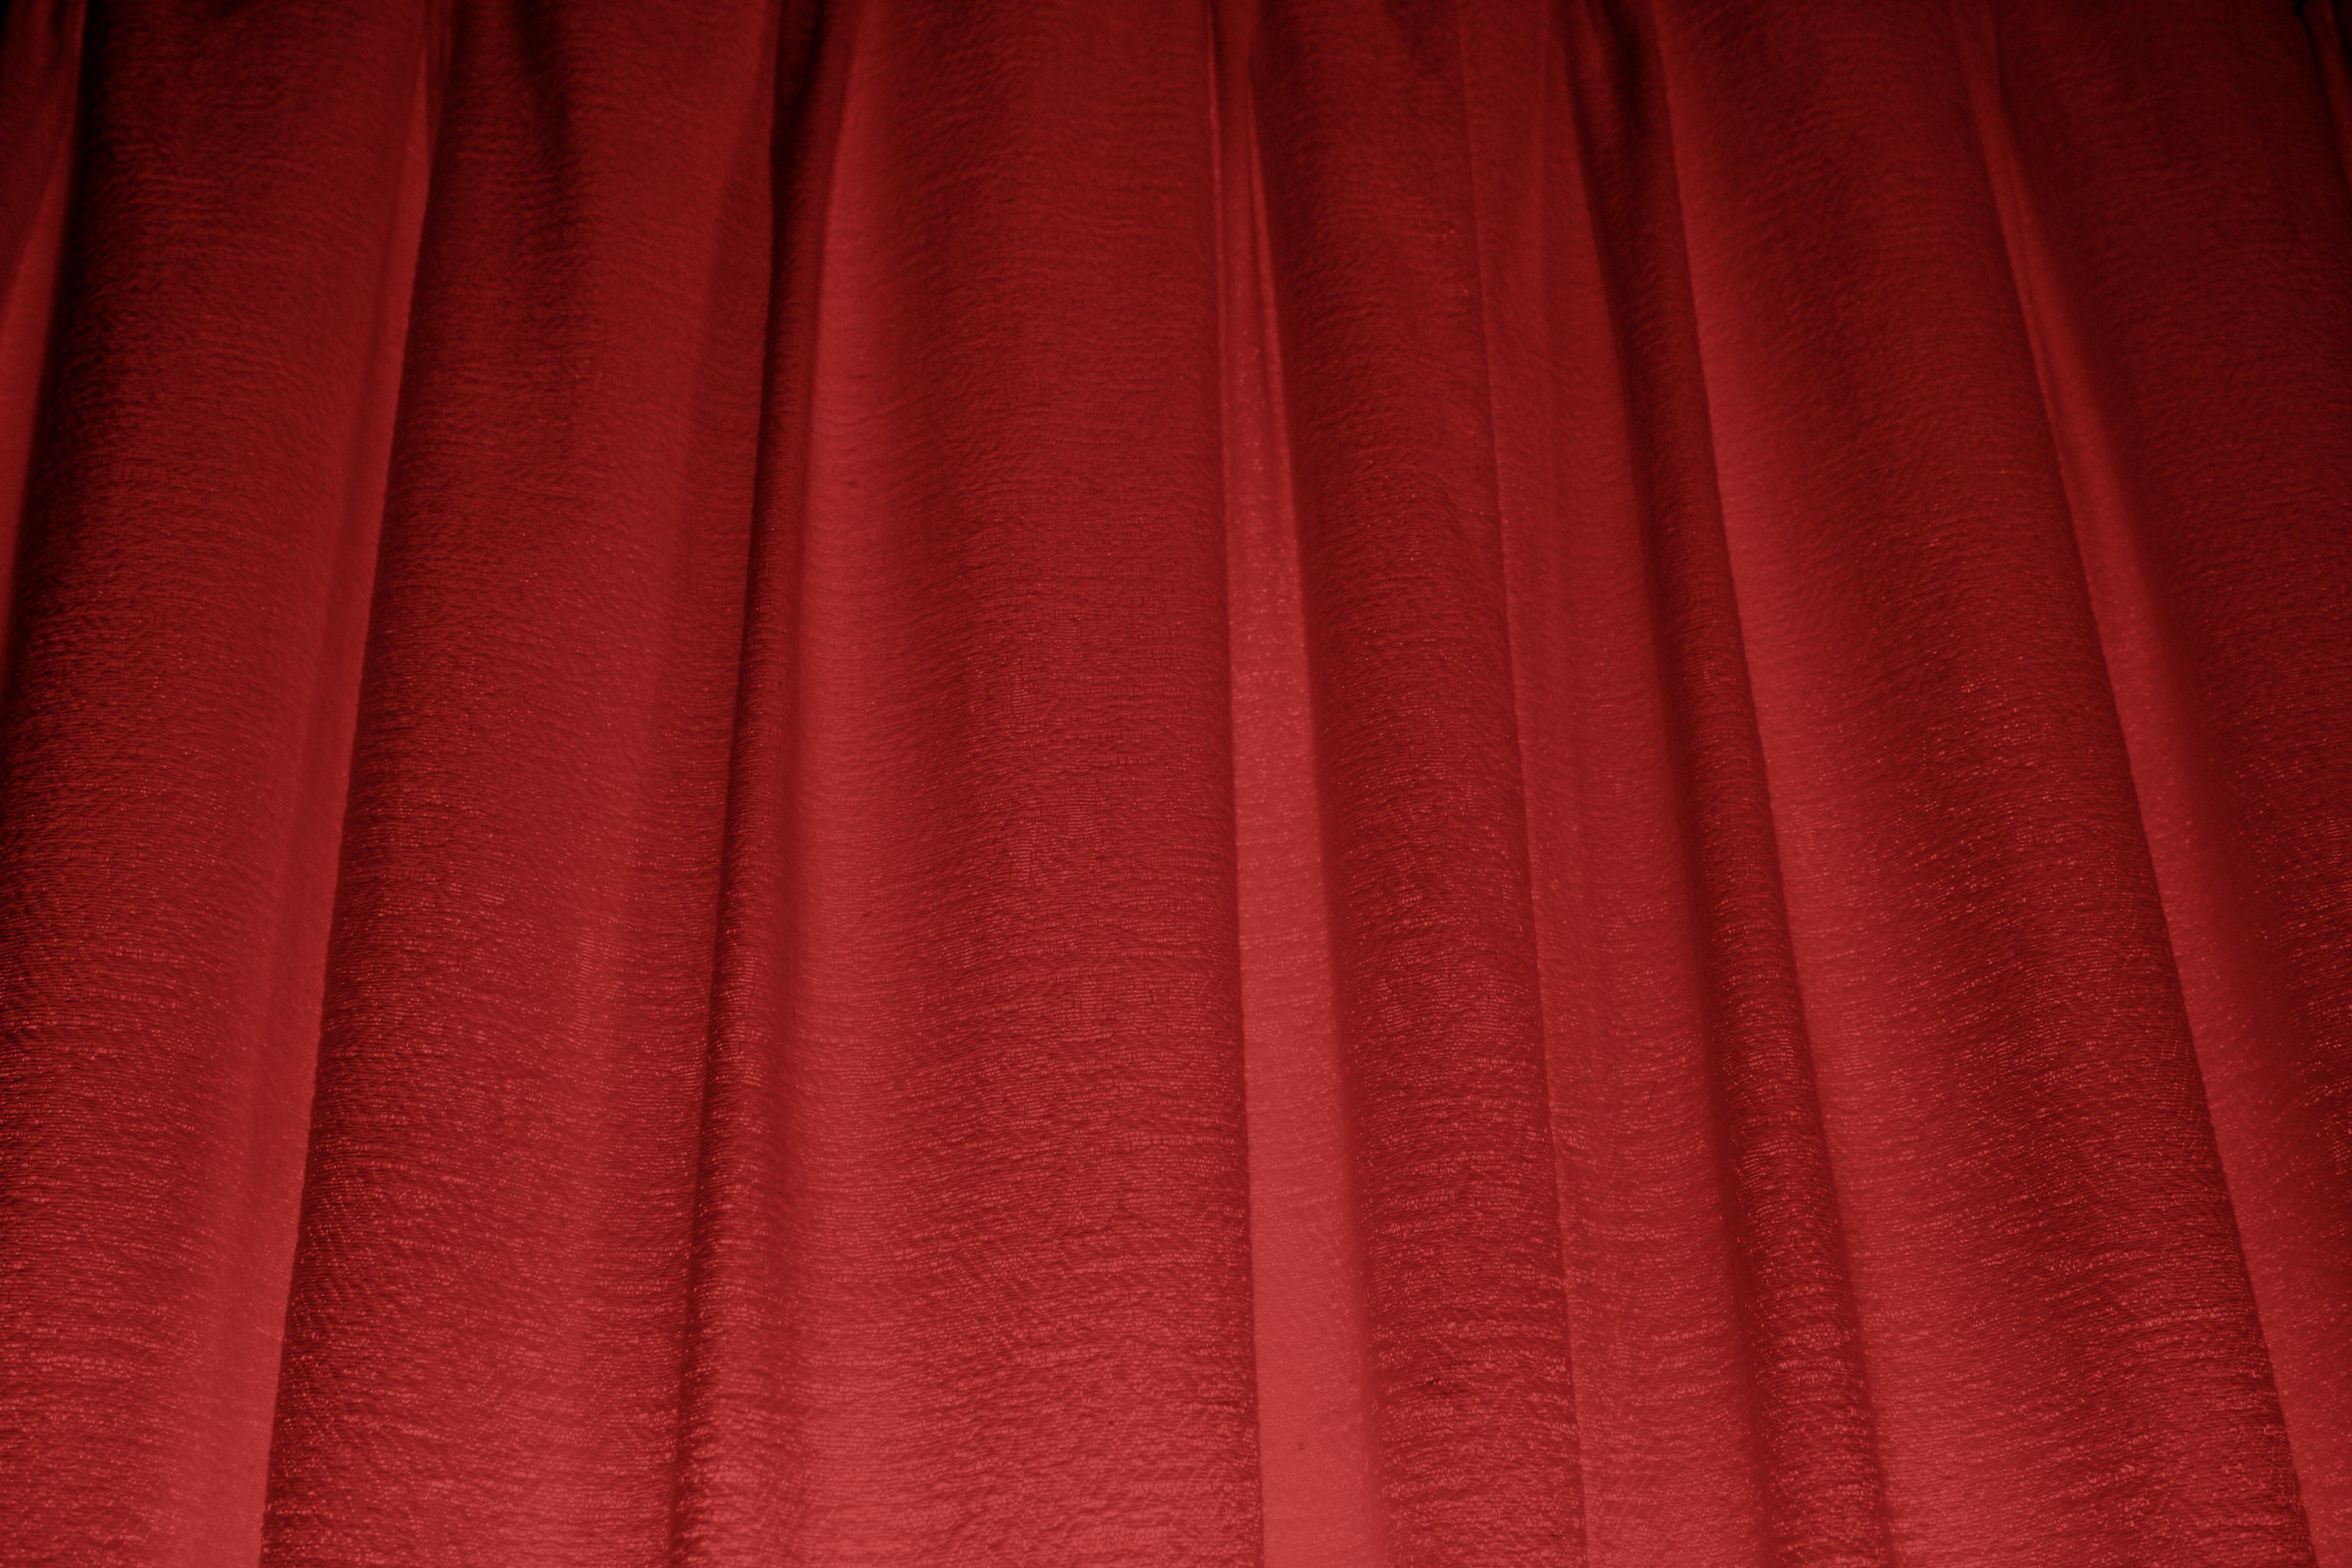 Red Curtains Texture Picture. Free Photograph. Photo Public Domain